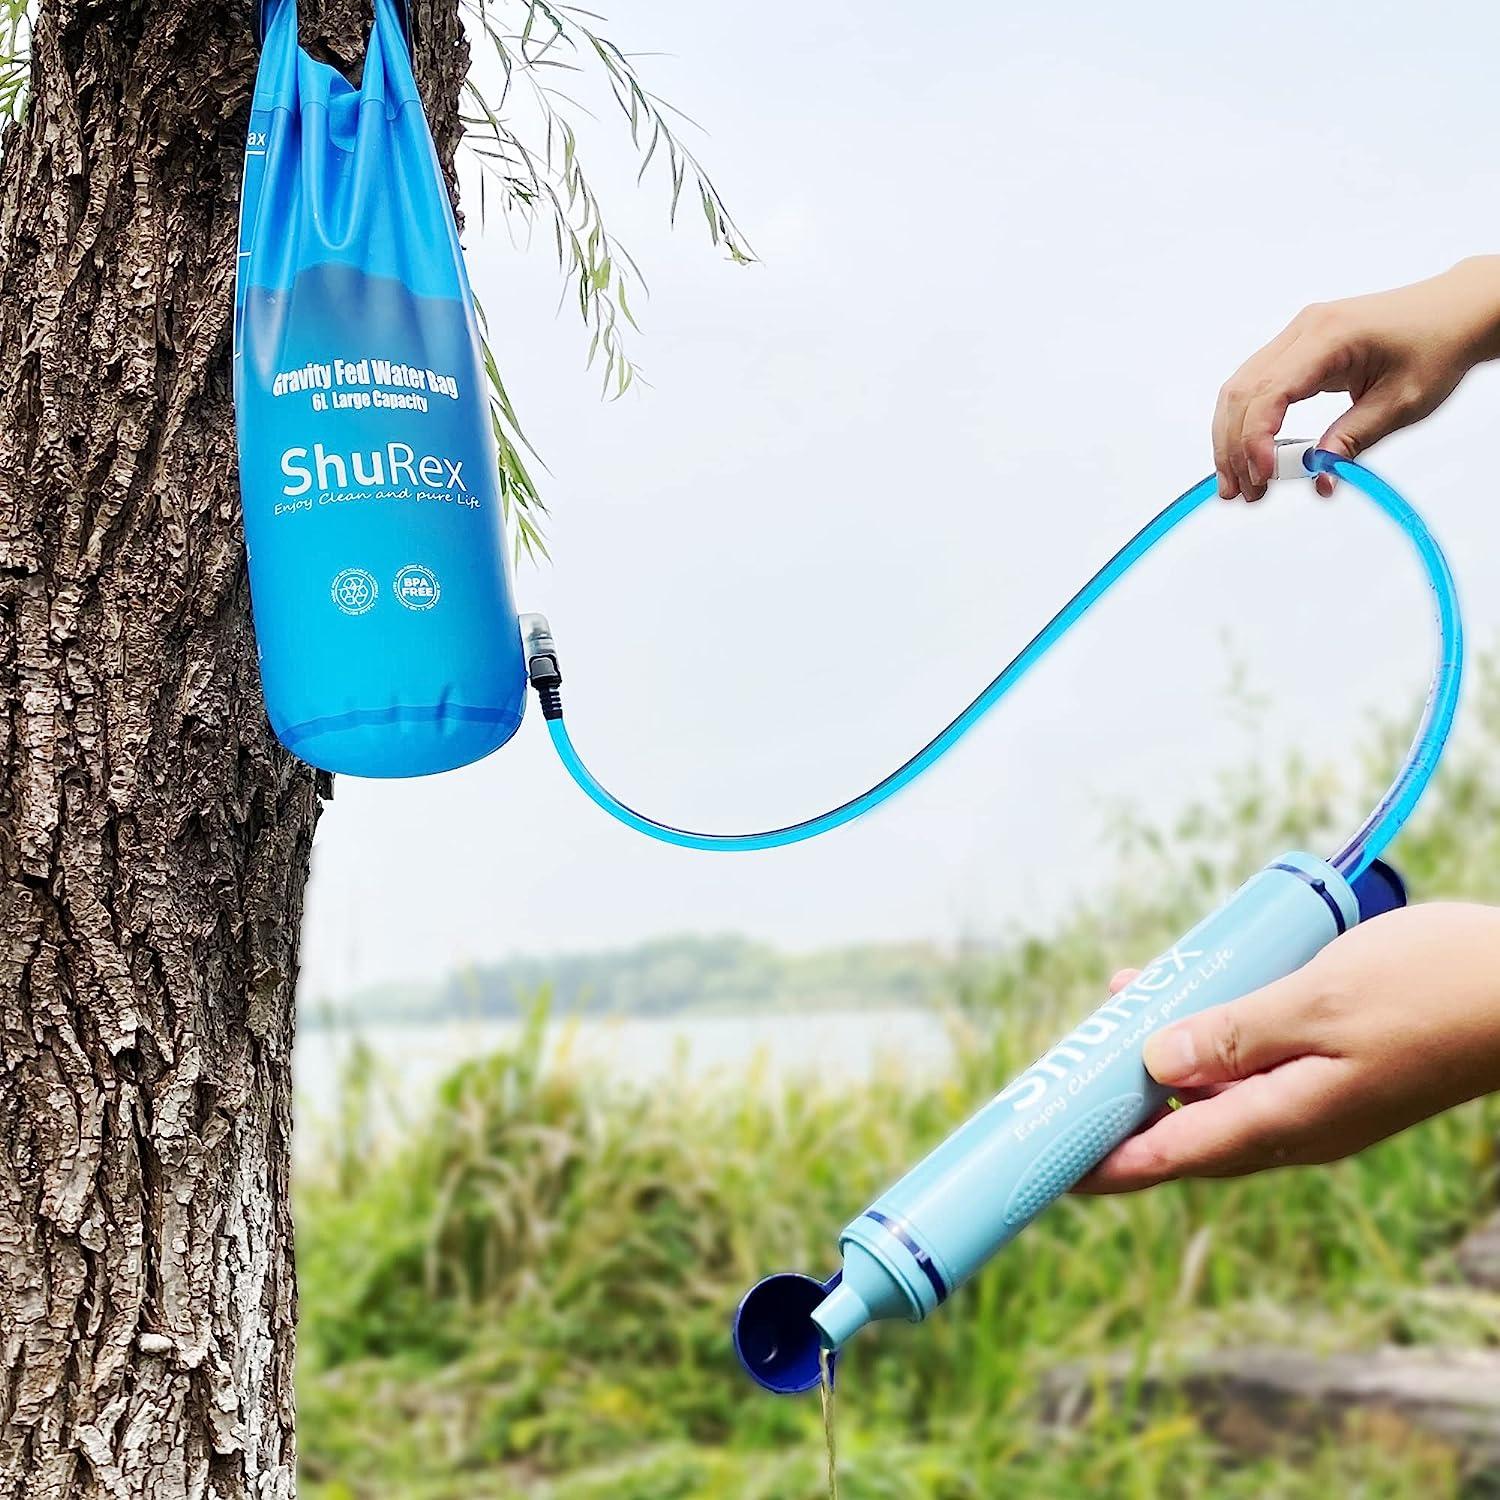 Shurex Gravity-Fed Water Bag for Sawyer Survival Water Filter Straw, 1.5  Gal Large Gravity Water Bladder Compatible with LifeStraw and Other Water  Filter Straw, Foldable, BPA-Free (6L)